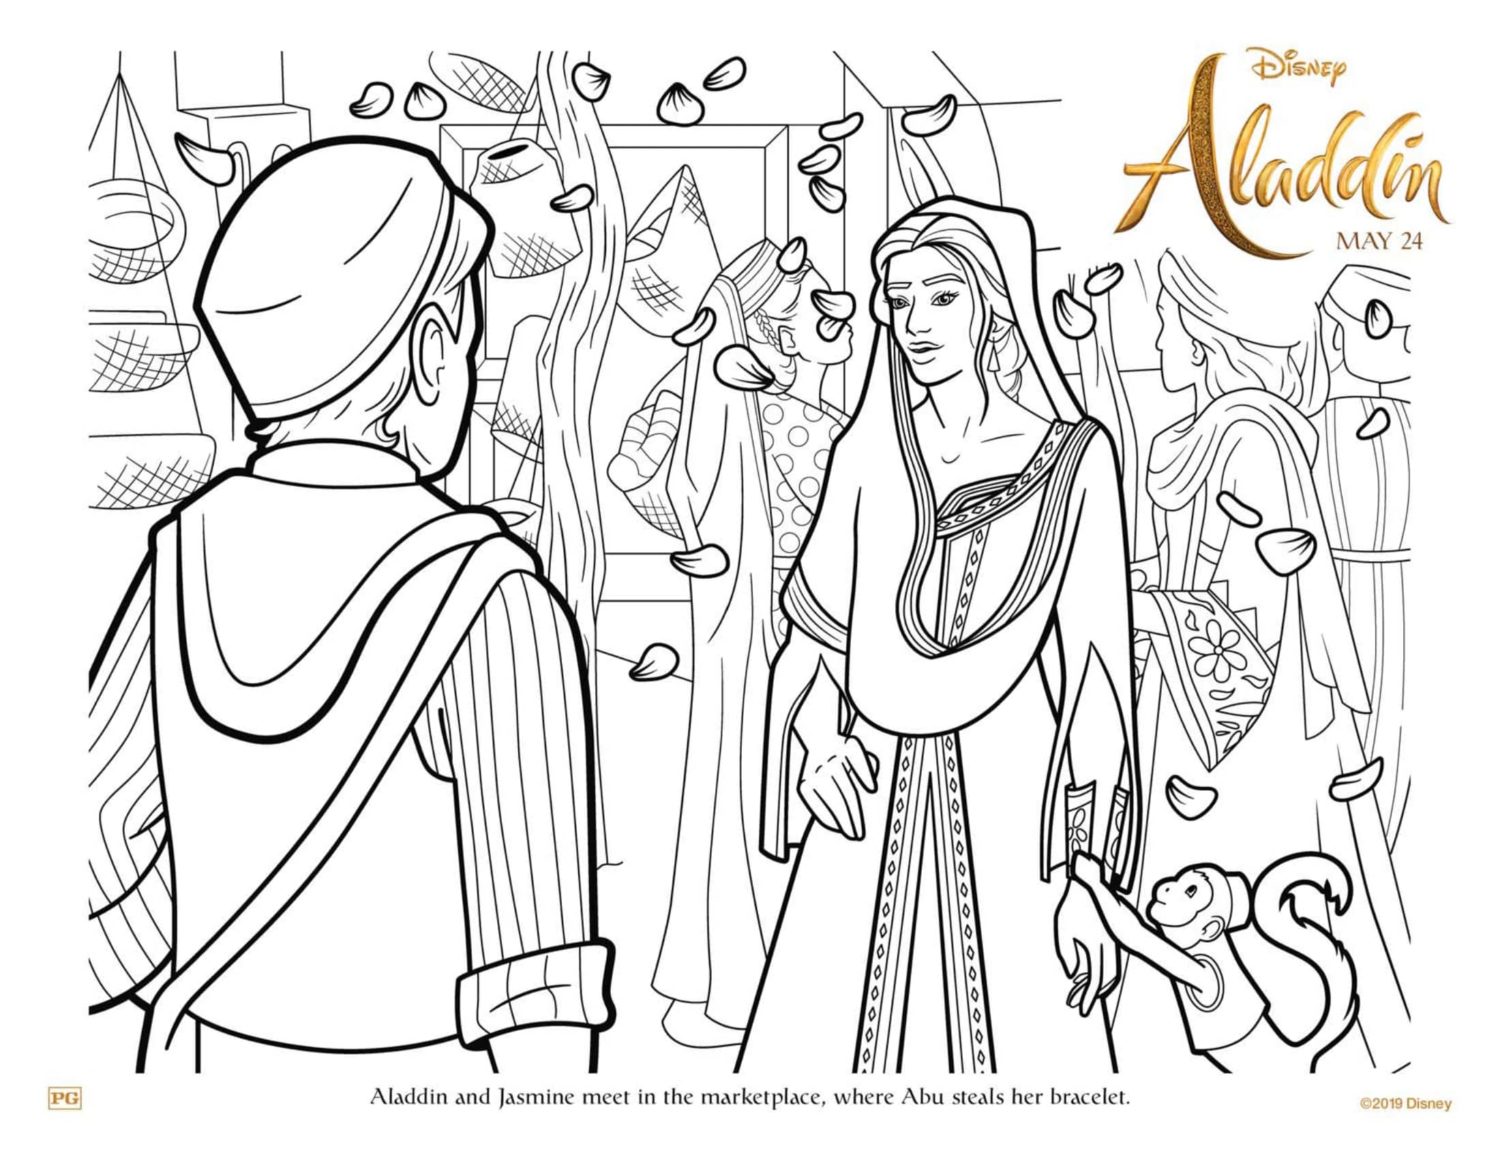 Aladdin and Jasmine in the Market Coloring Page and Activity Sheet